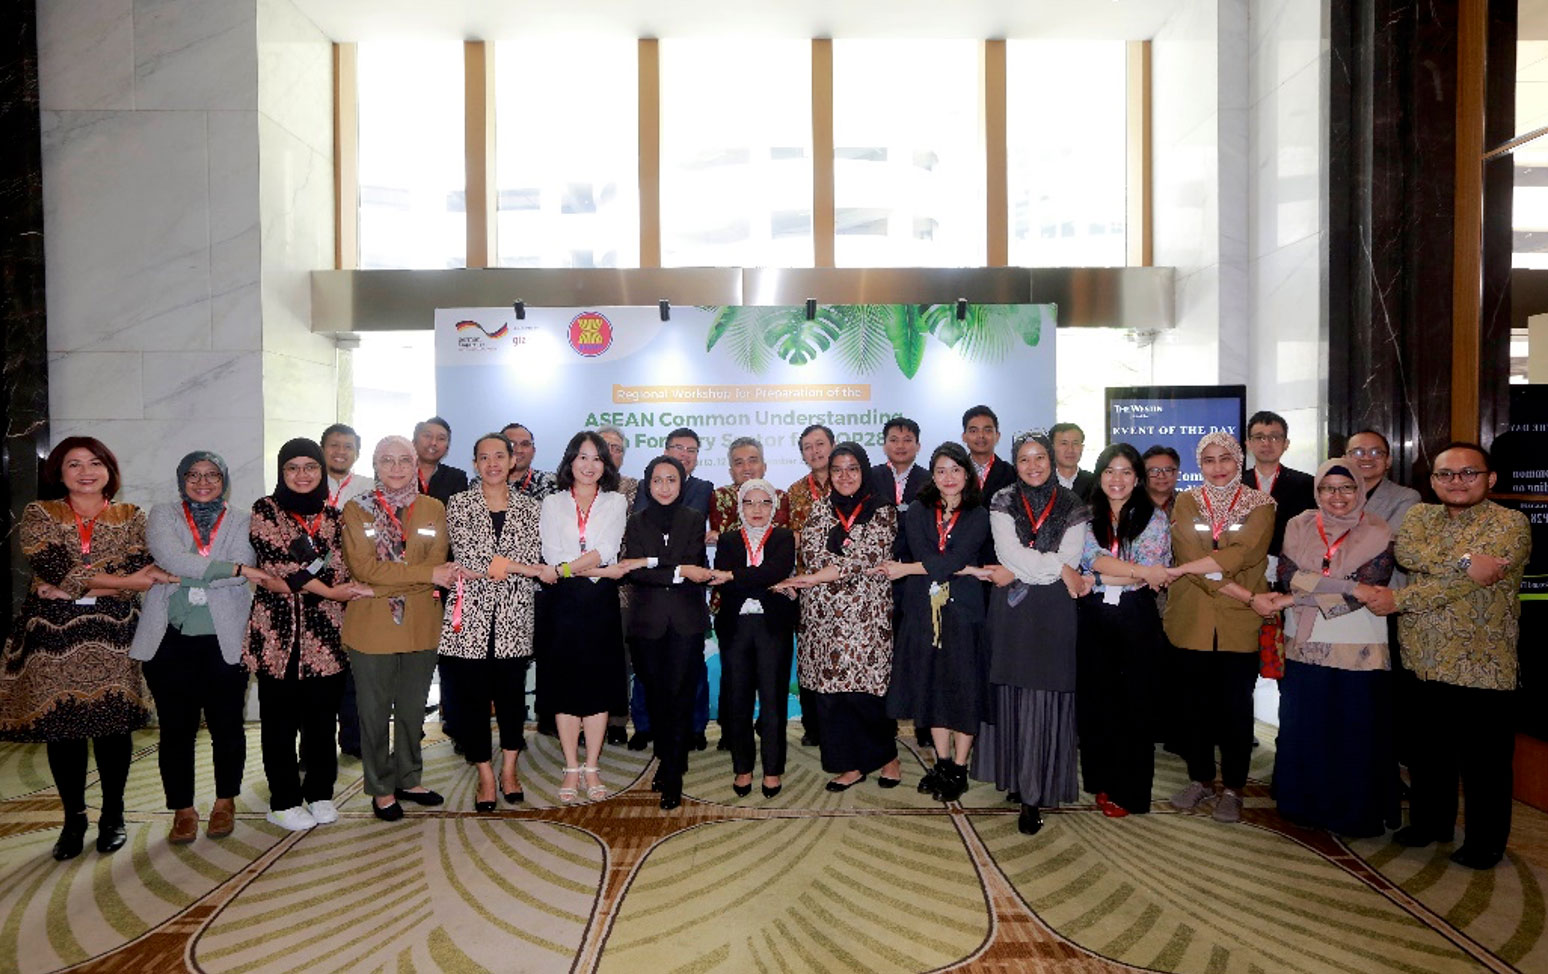 Online and onsite participants of the “Regional Workshop for the Preparation of the ASEAN Common Understanding on Forestry Sector for COP28" on 12-13 September in Jakarta.